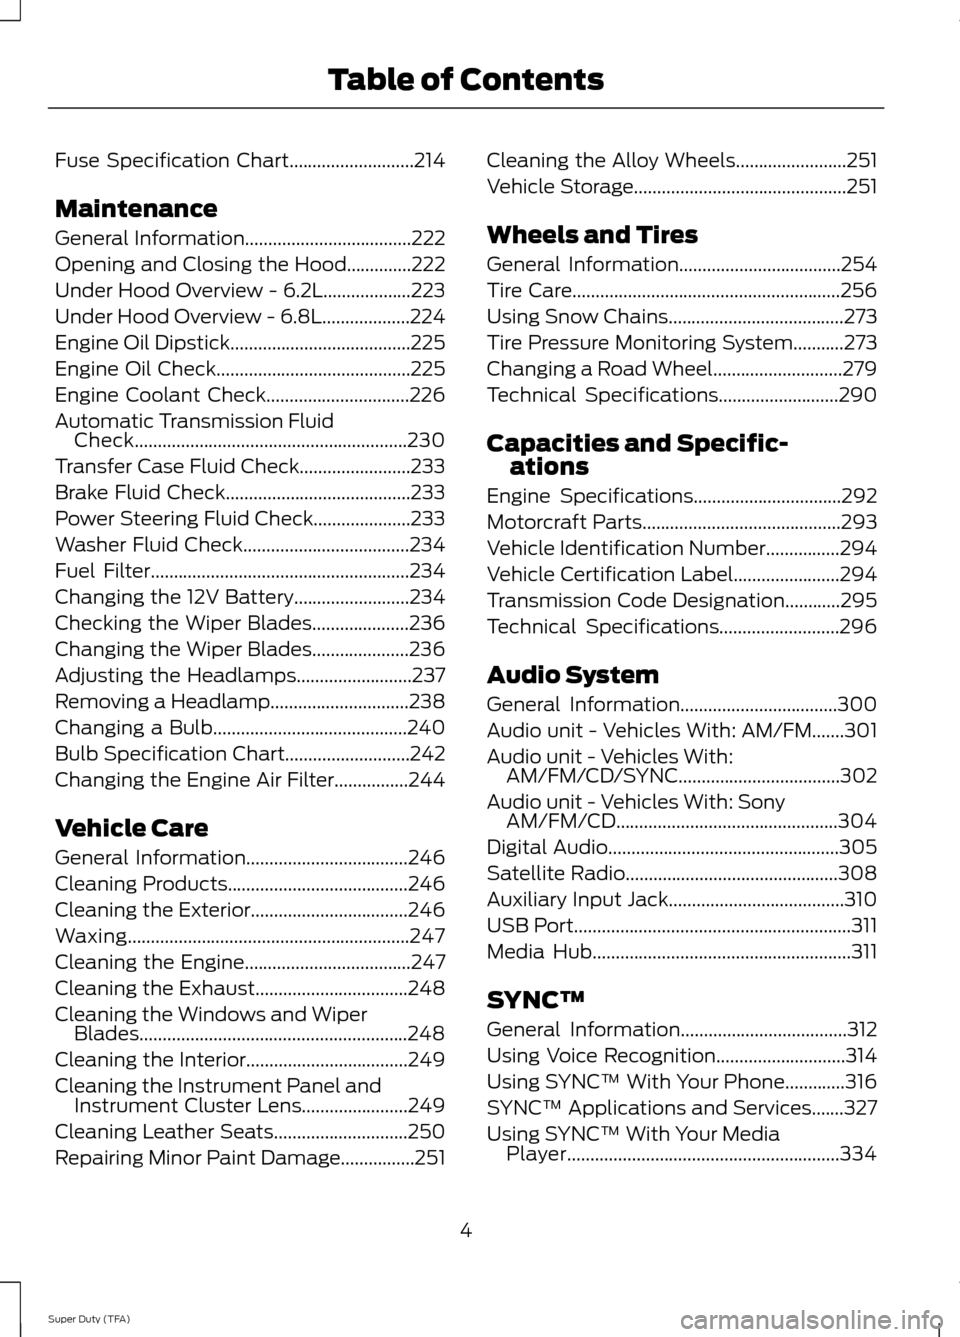 FORD SUPER DUTY 2014 3.G Owners Manual Fuse Specification Chart...........................214
Maintenance
General Information....................................222
Opening and Closing the Hood..............222
Under Hood Overview - 6.2L..